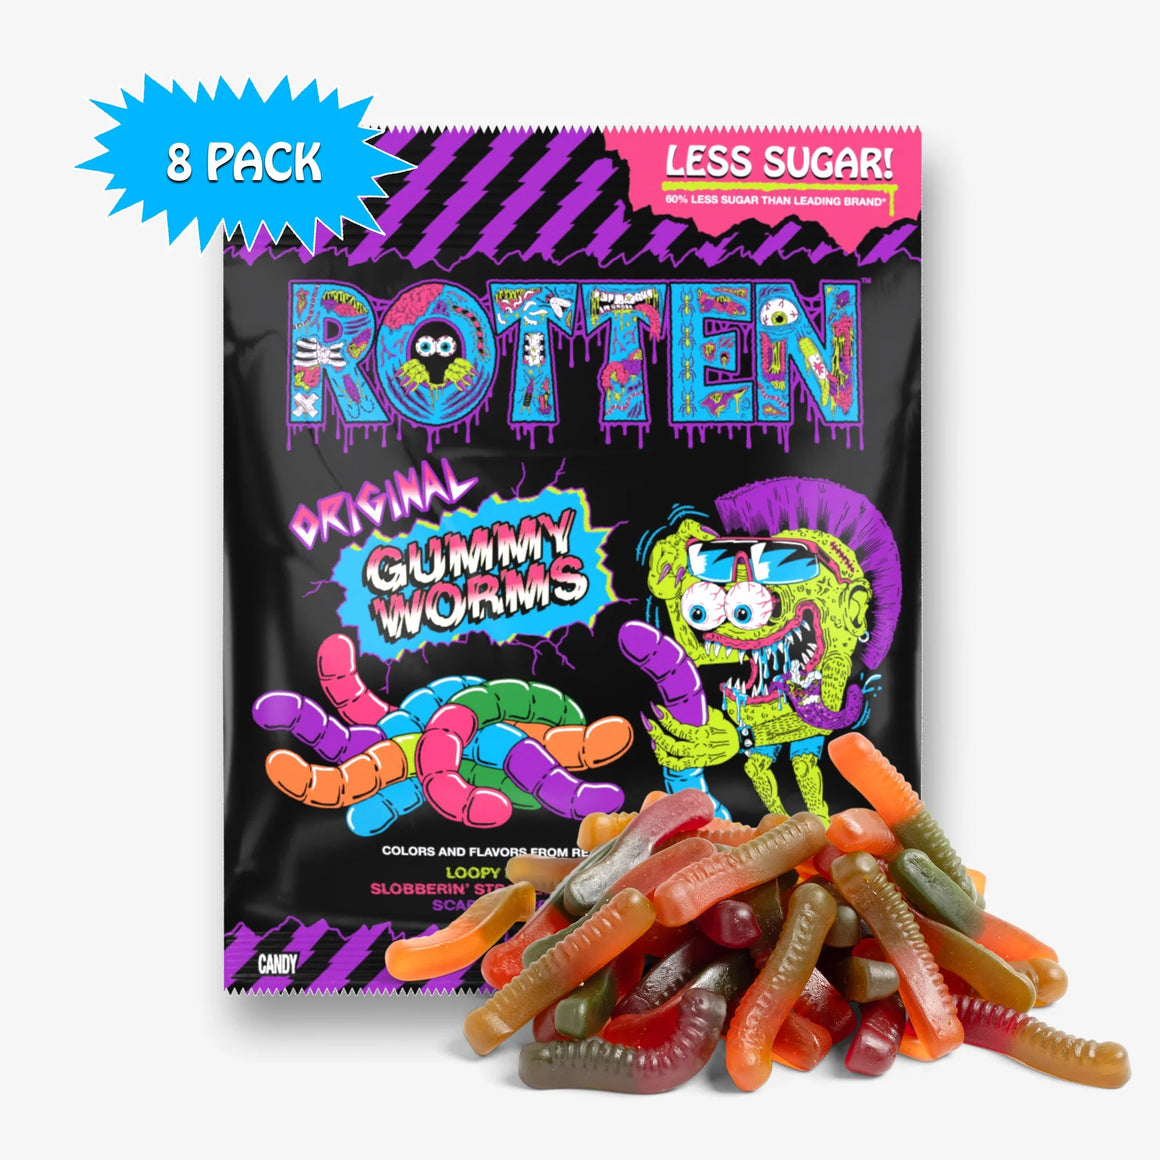 Rotten Original Gummy Worms 1.8 oz. Bag - For fresh candy and great service, visit www.allcitycandy.com